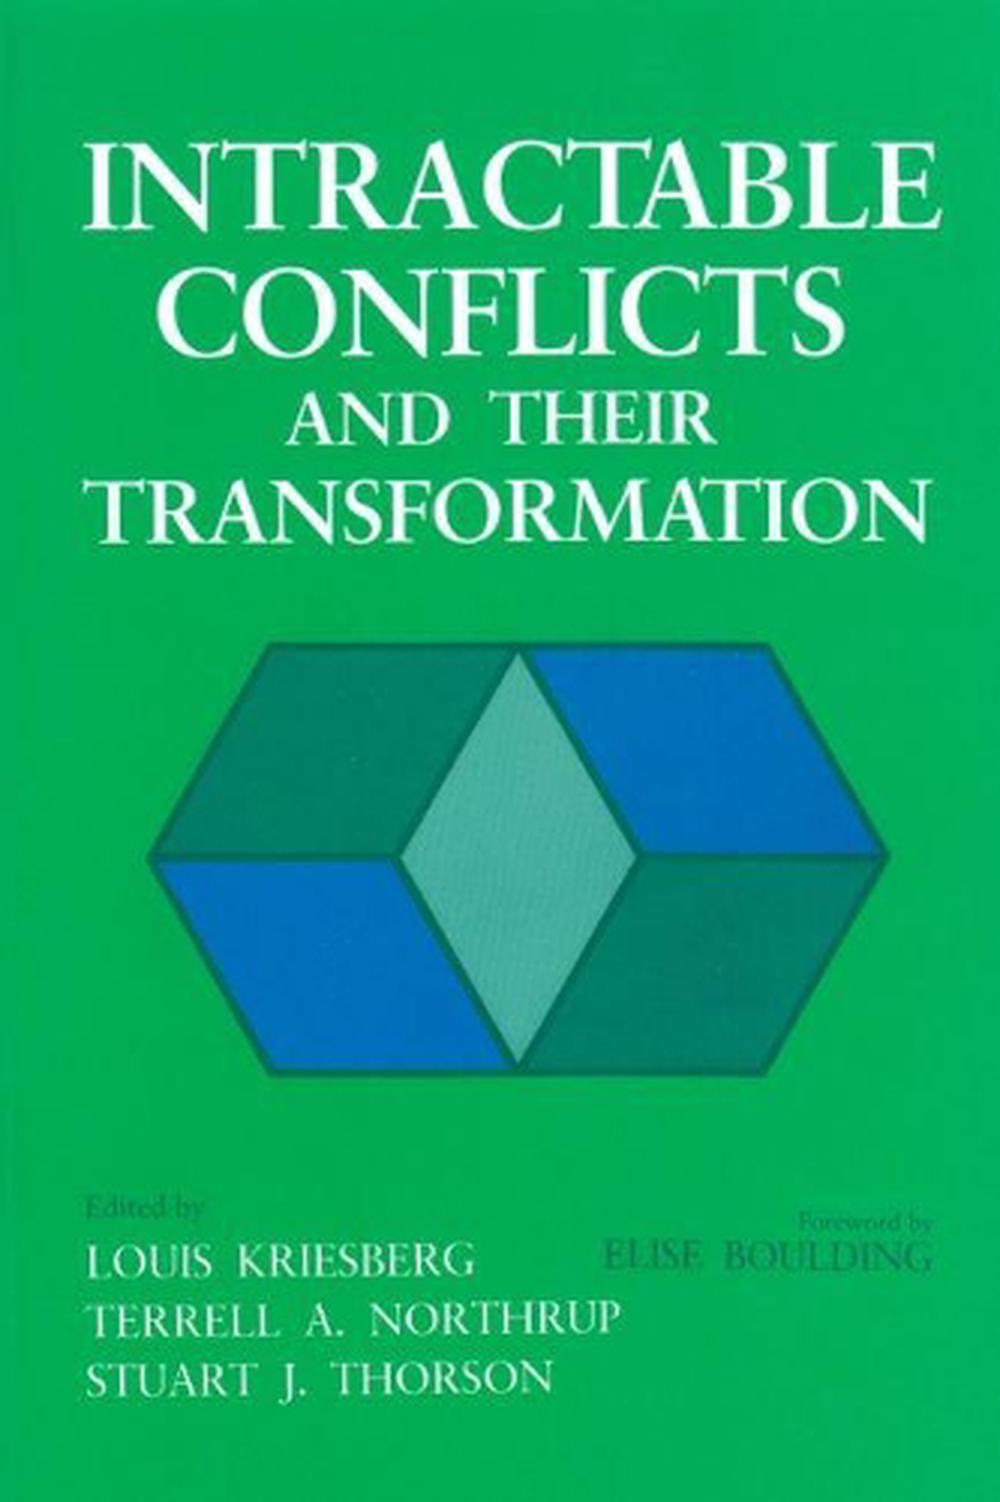 Intractable Conflicts and Their Transformation by Louis Kriesberg ...